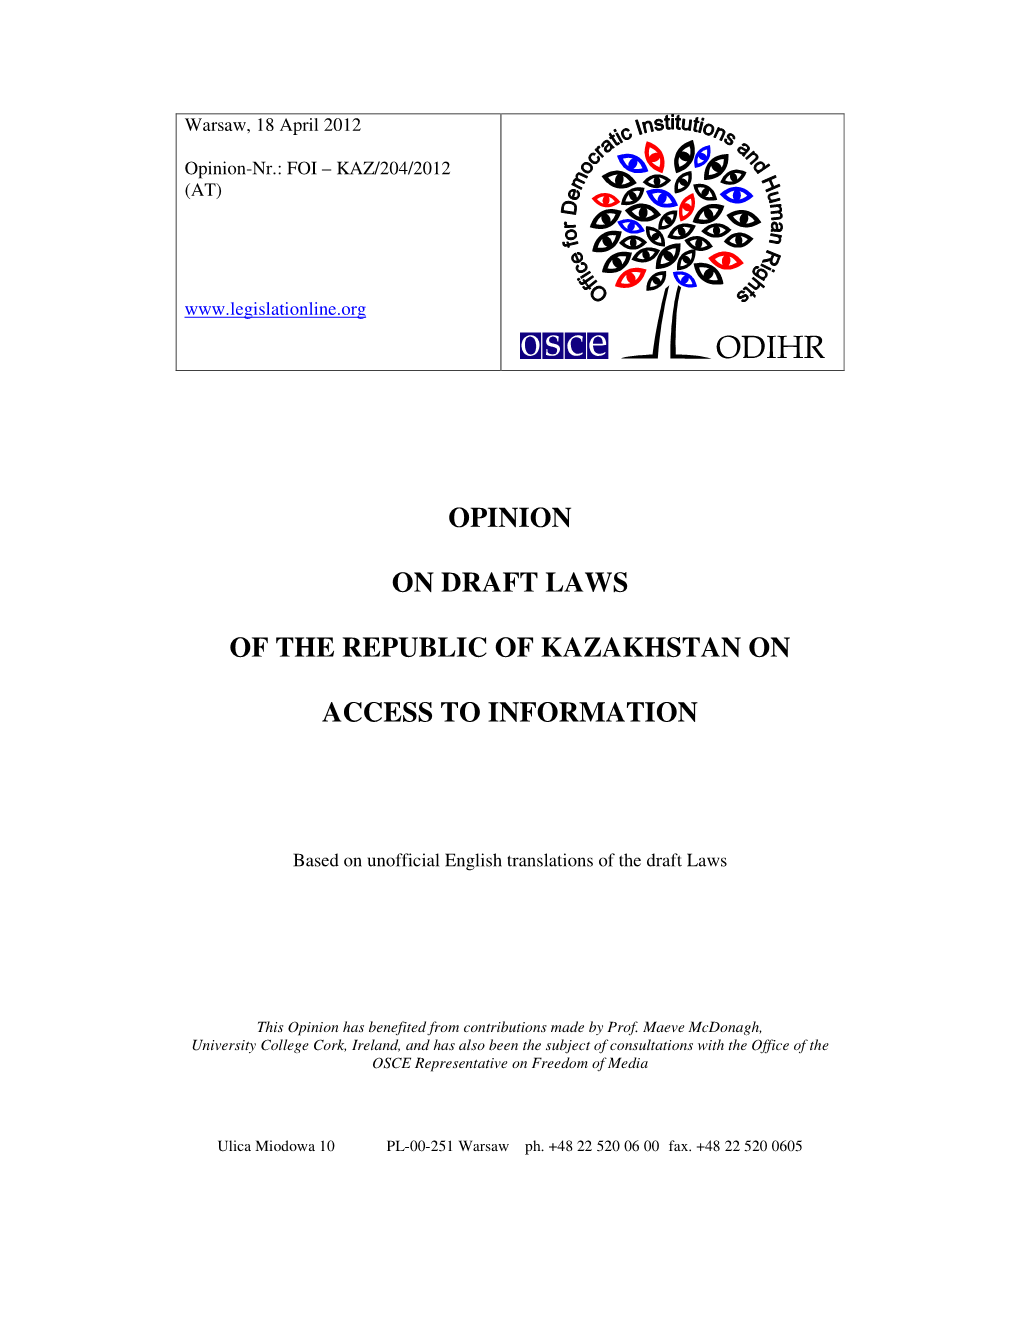 Opinion on Draft Laws of the Republic of Kazakhstan on Access to Information